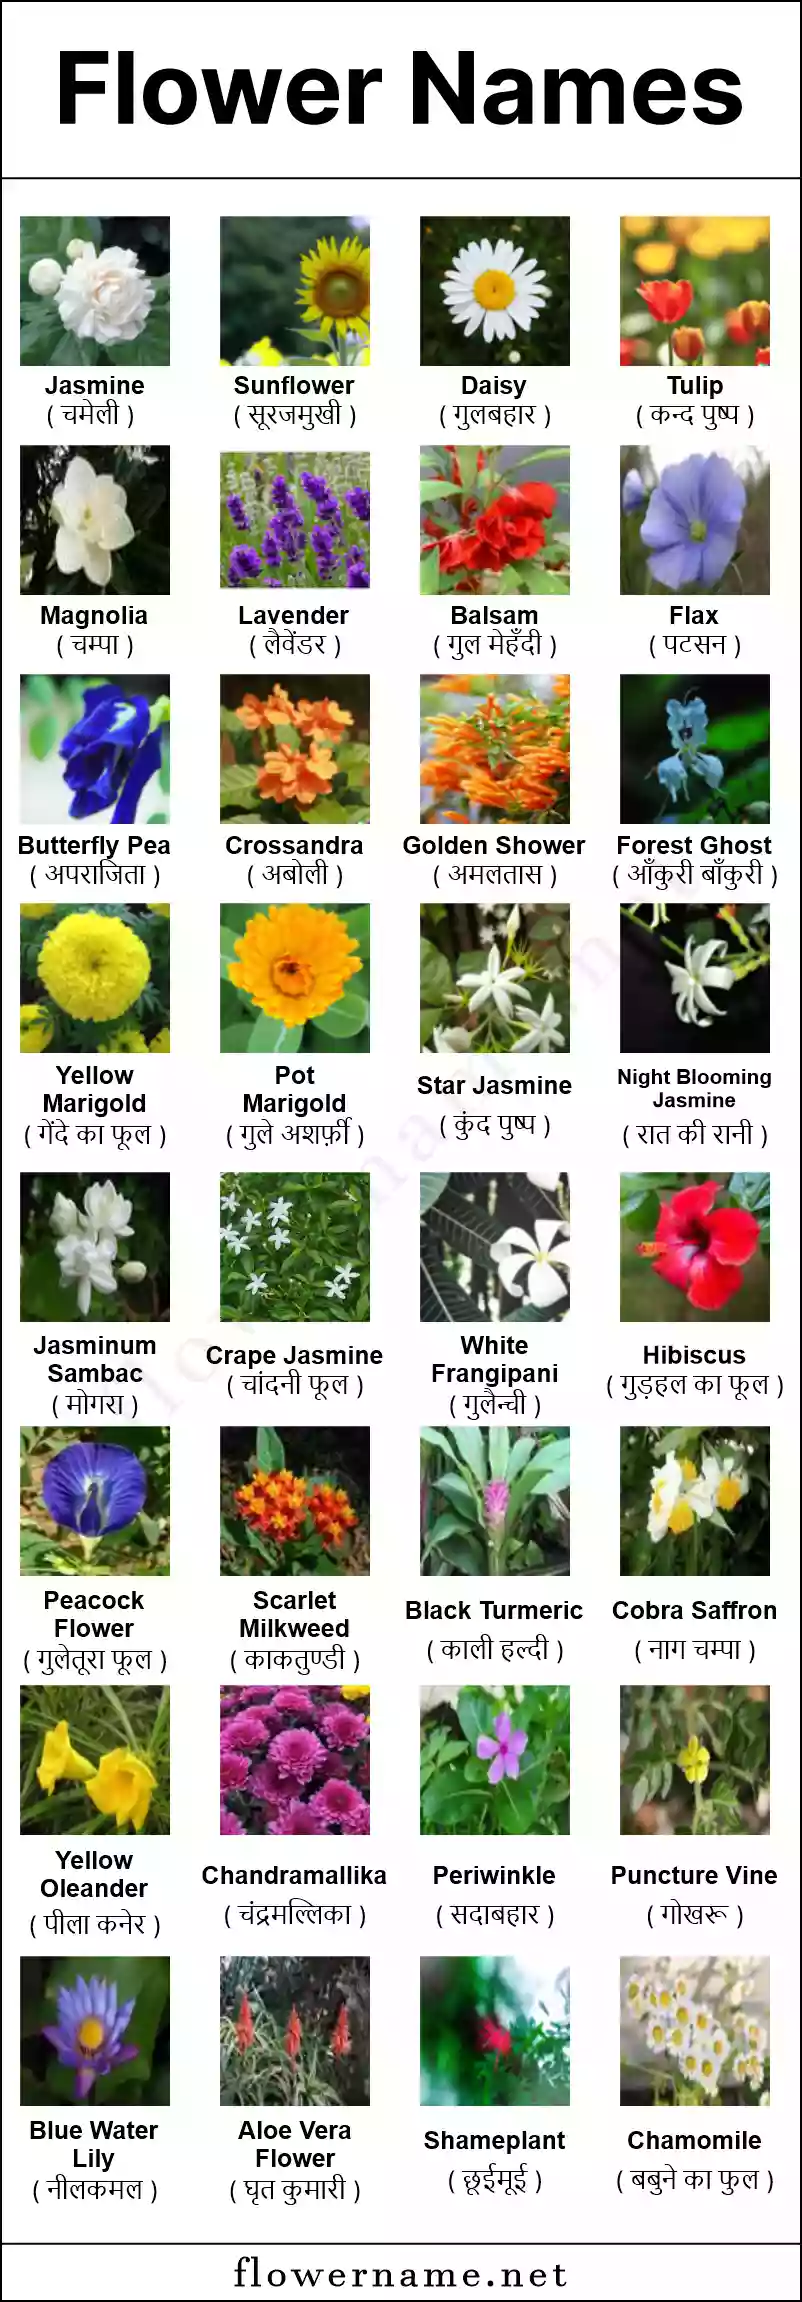 Flower Infographic which contains 32 different flowers.